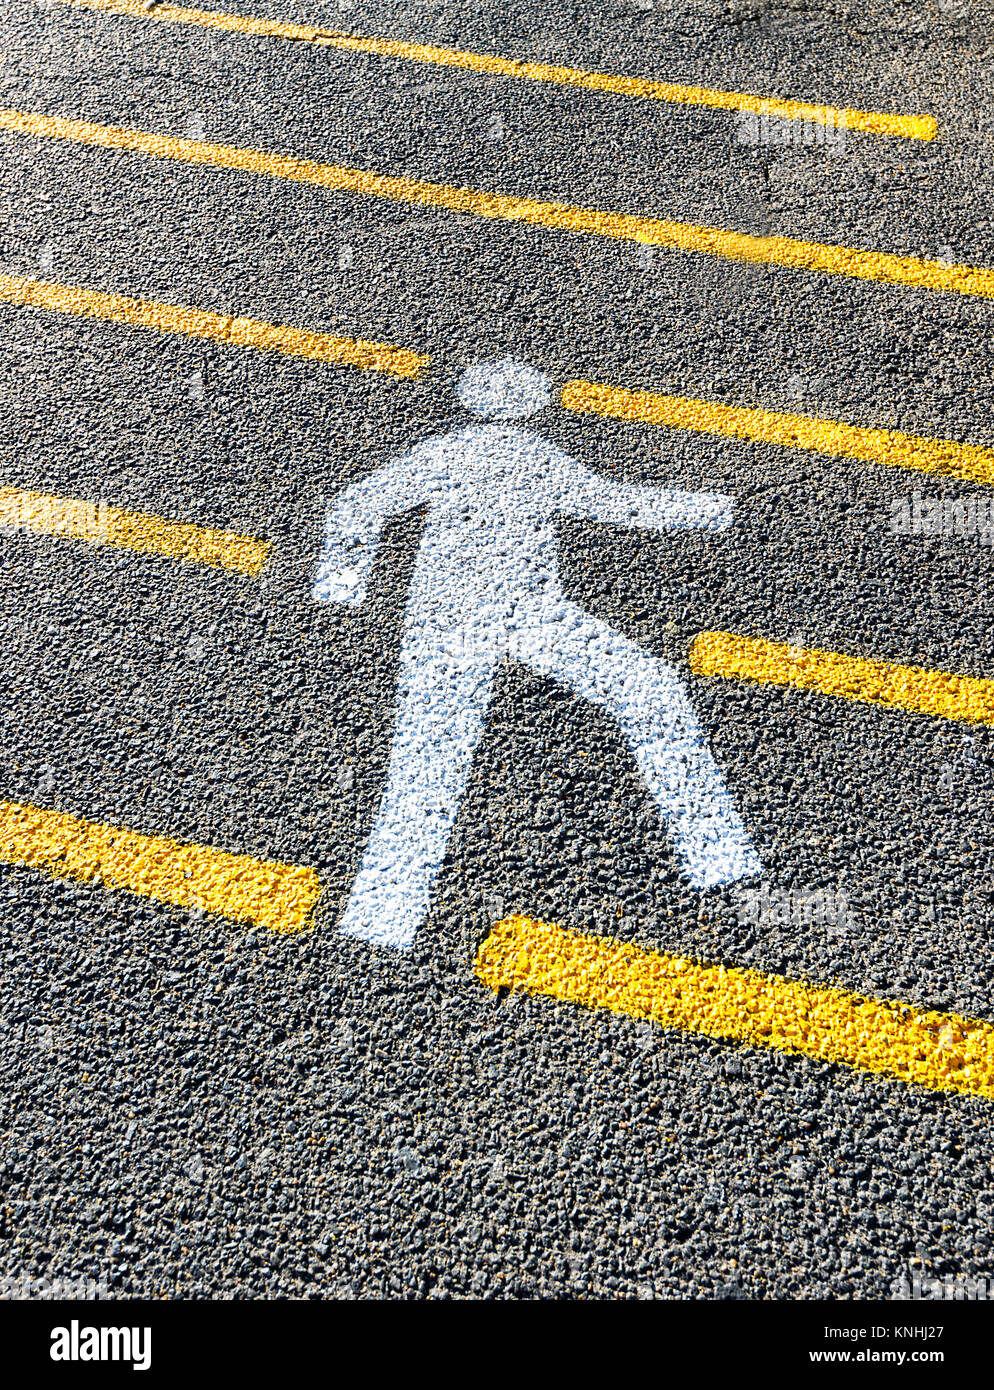 Silhouette of a pedestrian crossing painted on the road, Port Douglas, Far North Queensland, FNQ, QLD, Australia Stock Photo